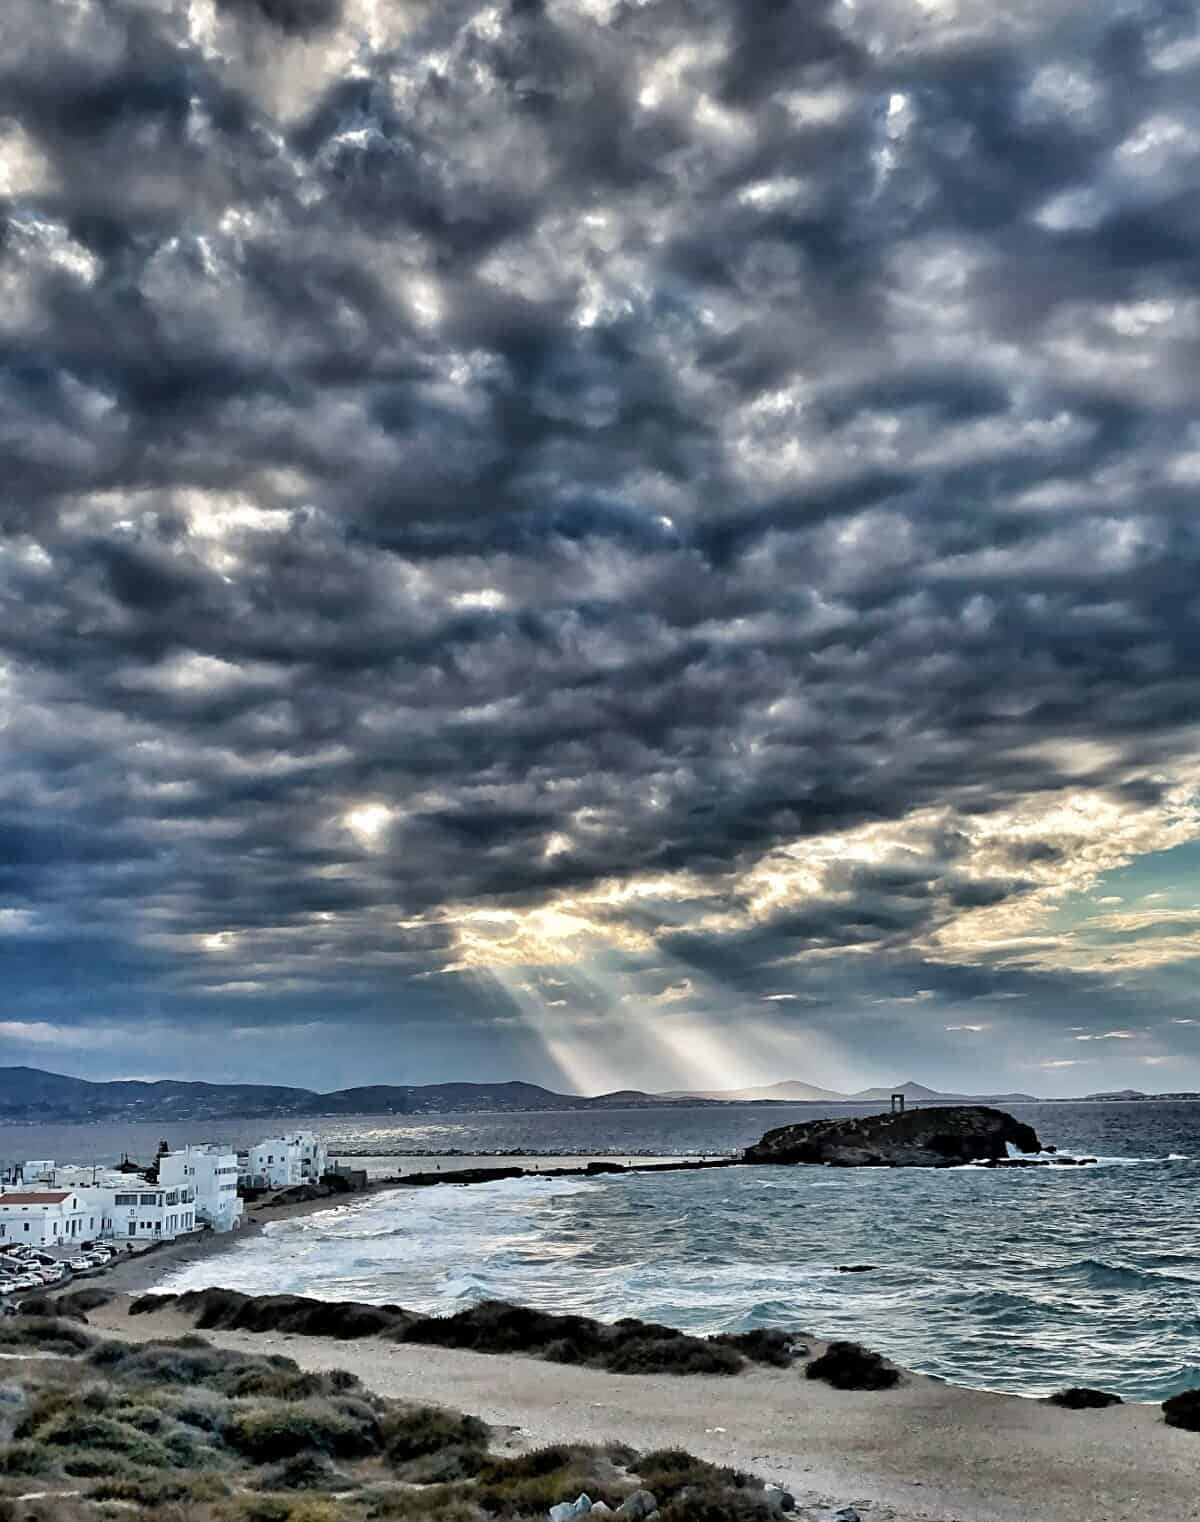 A cloudy but dramatic sunset over the Portara in Naxos Town